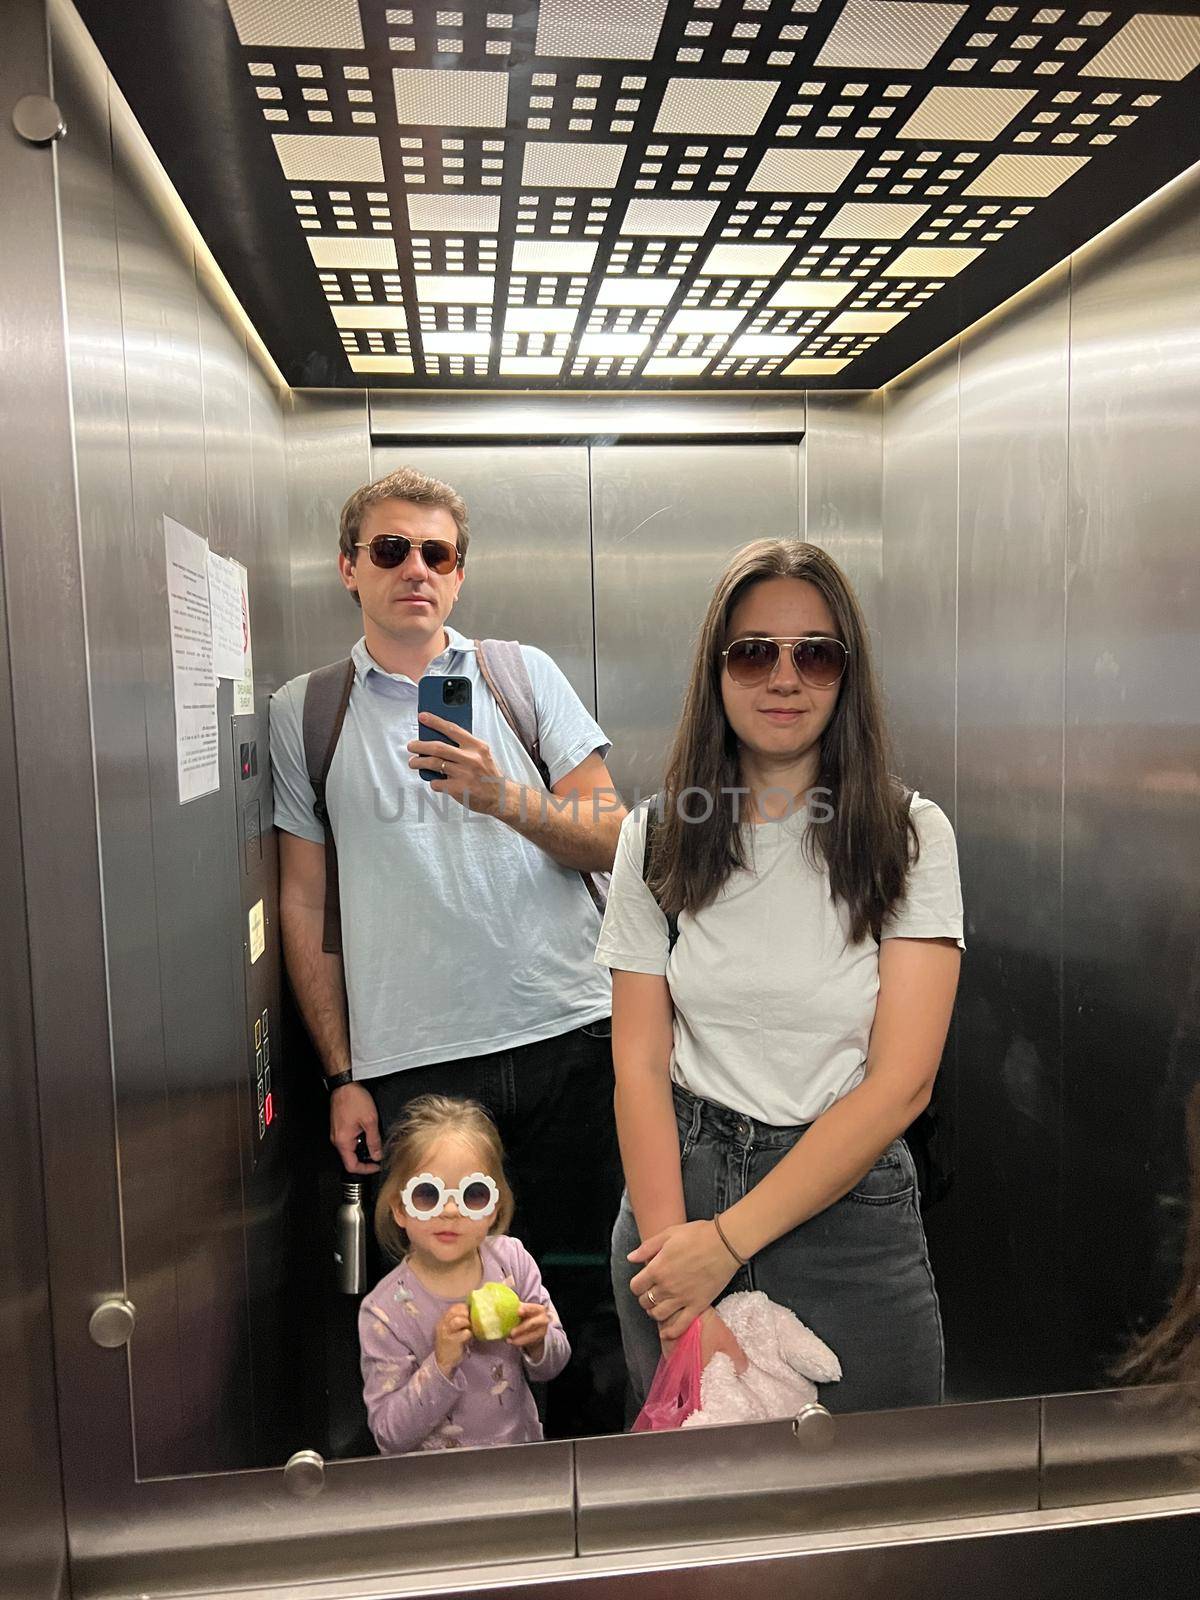 Mom, dad and a little girl are photographed in the elevator mirror on a smartphone. High quality photo